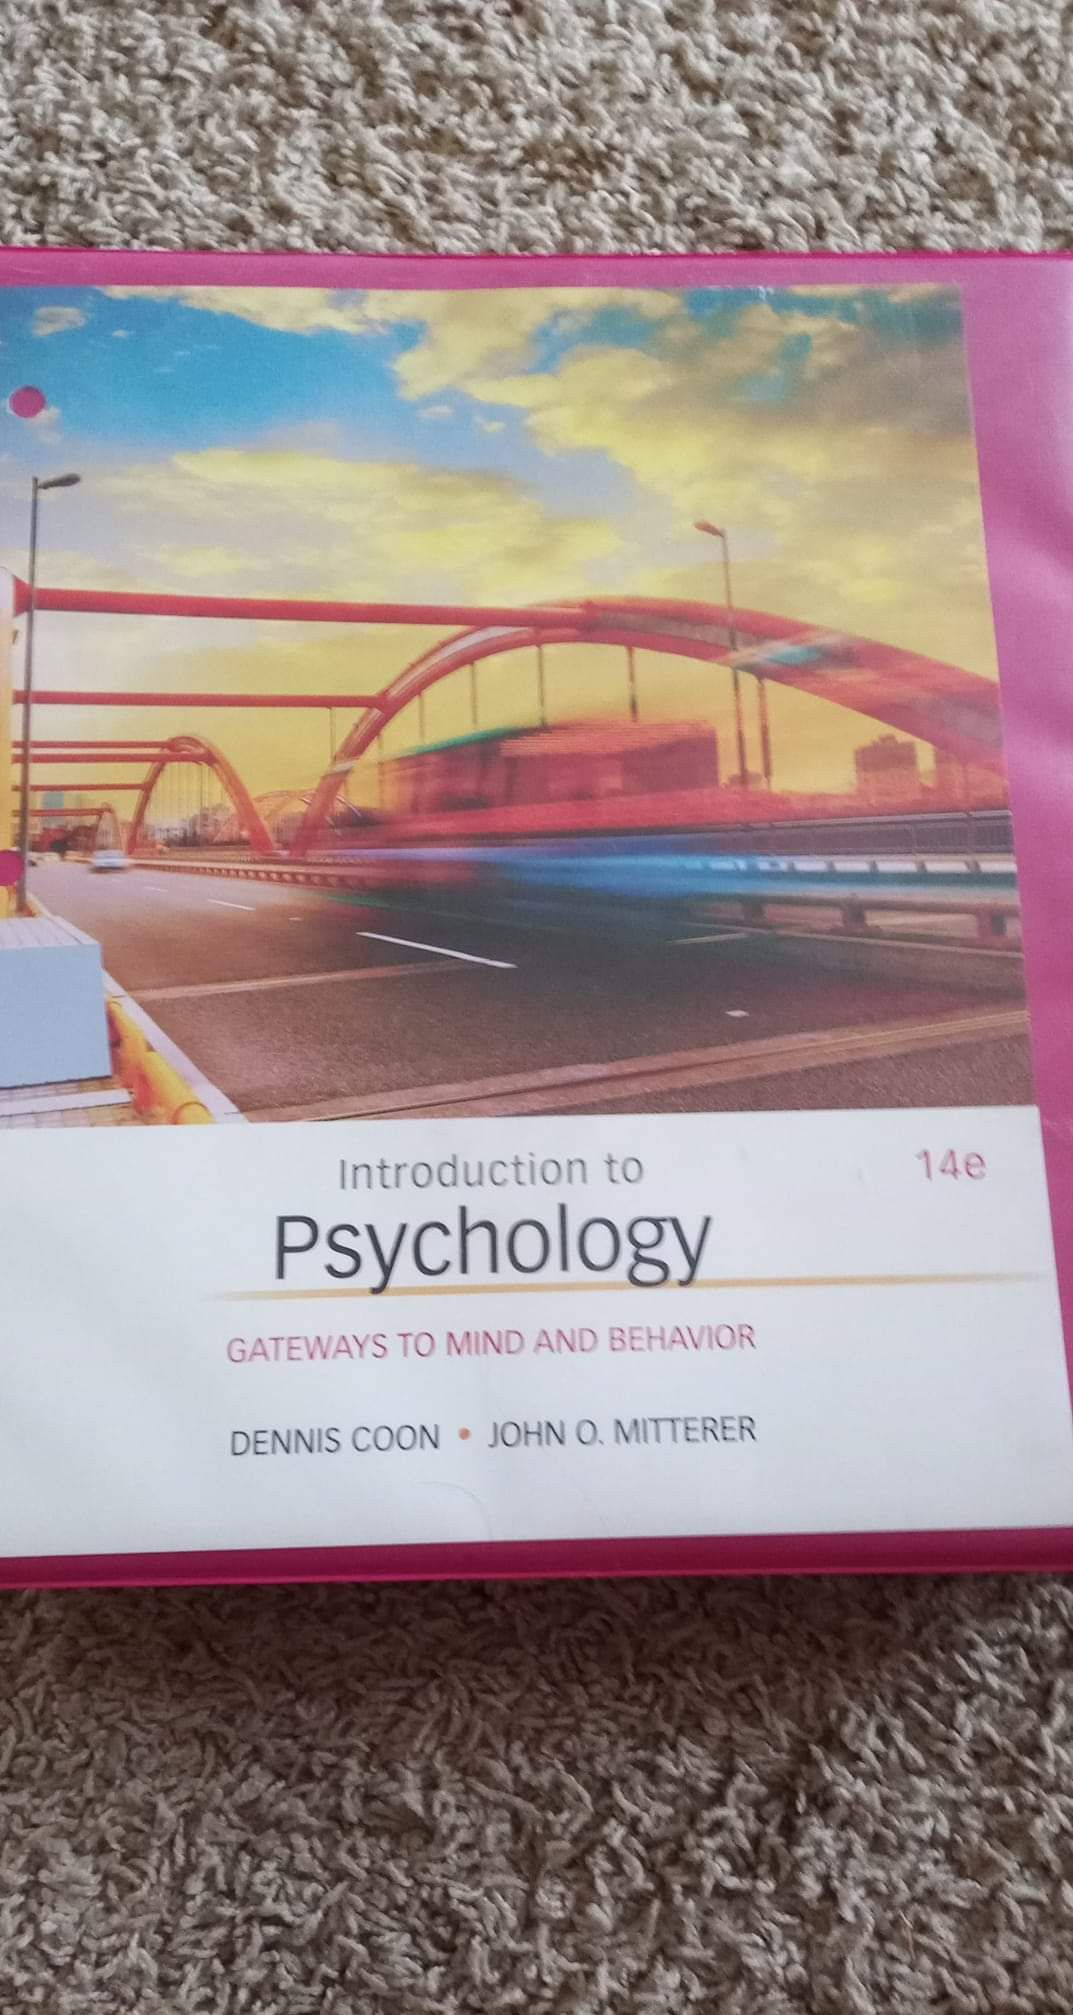 Introduction to psychology loose-leaf textbook